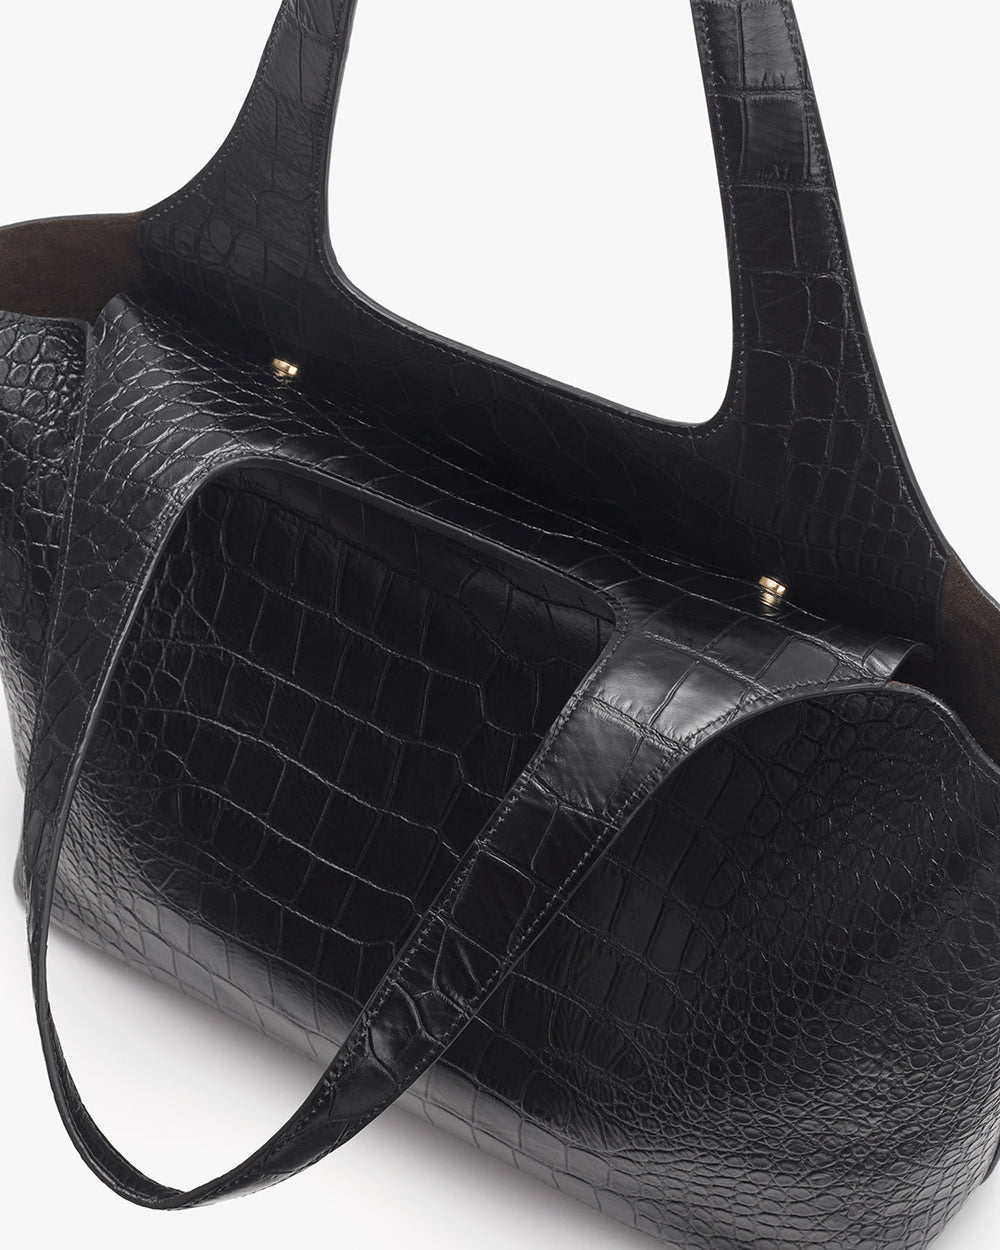 Handbag with croc-embossed leather and two straps.